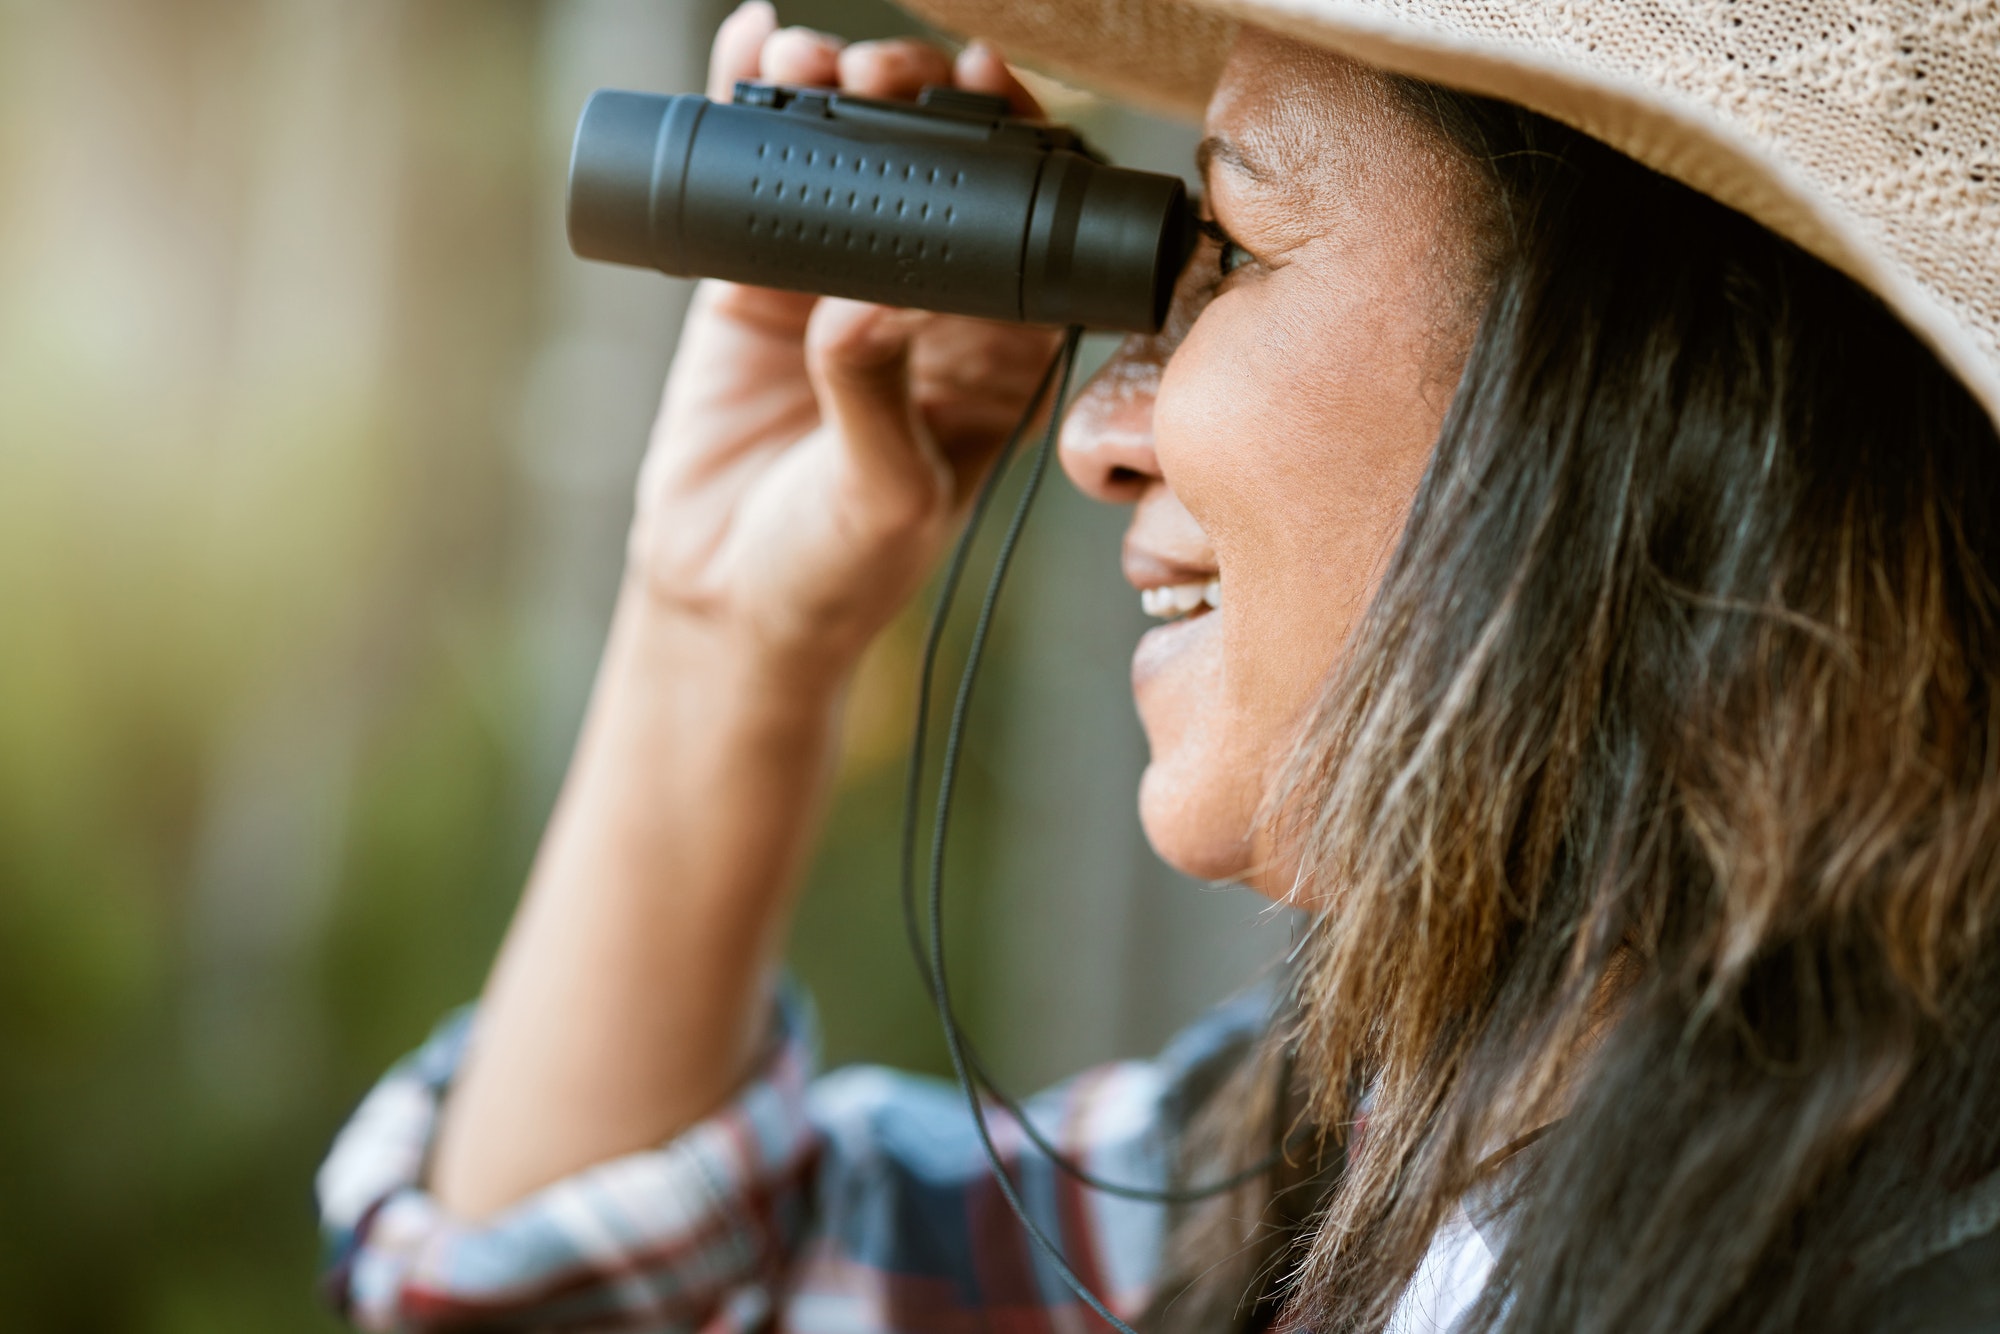 Nature, animal and bird watching of a smiling older woman looking and holding binoculars outside. C